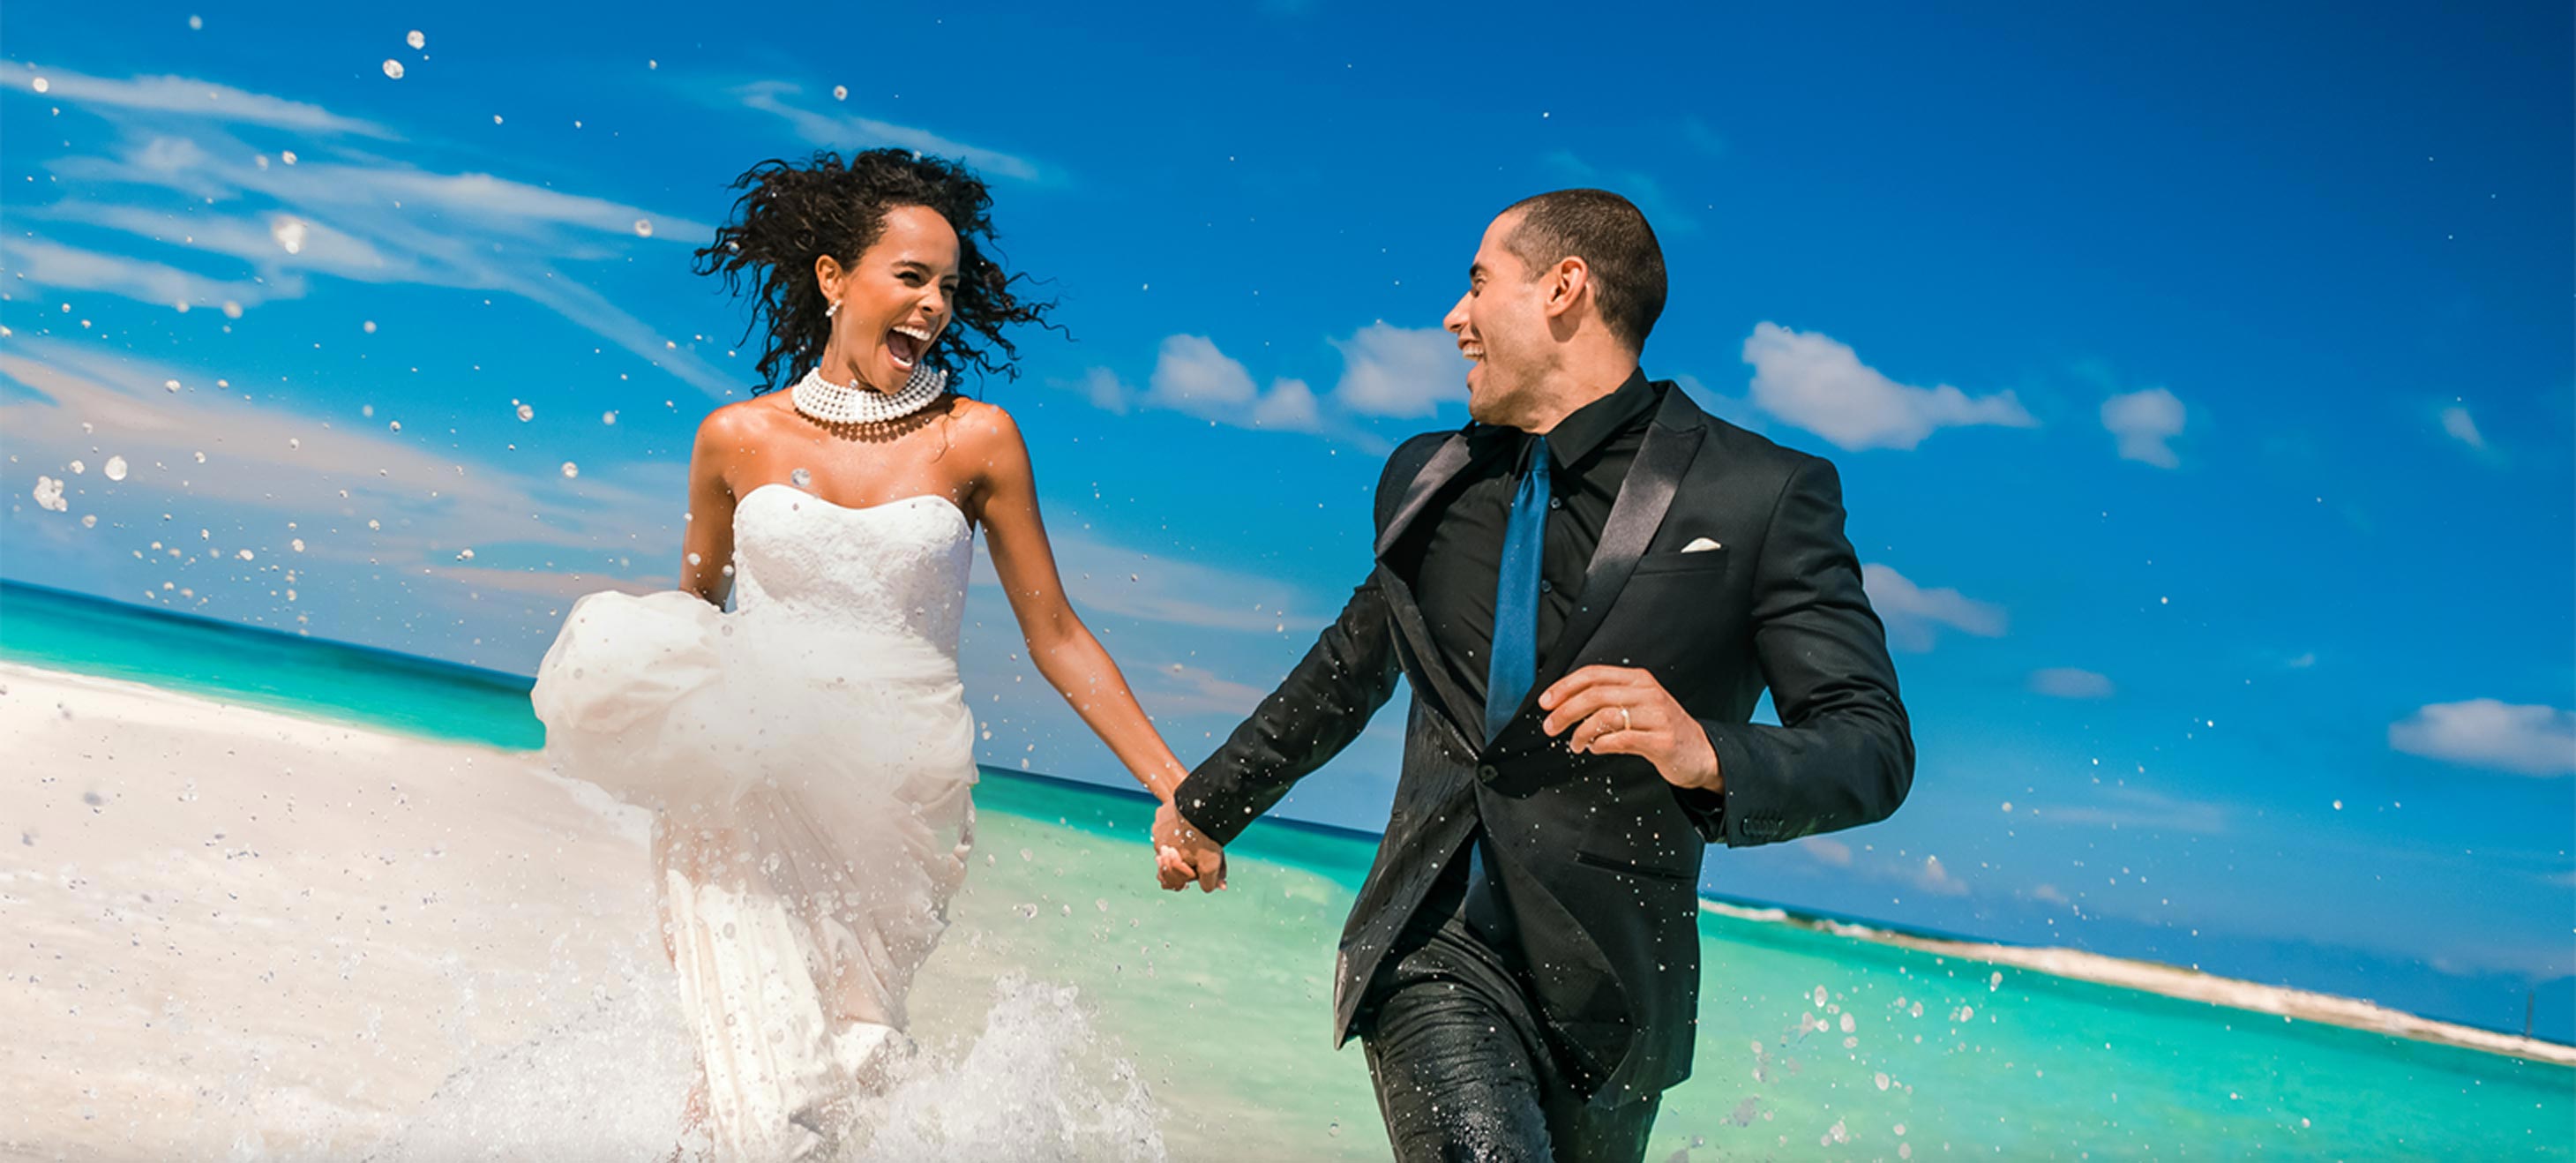 Sandals Wedding Packages - Everything You Need To Know - YouTube